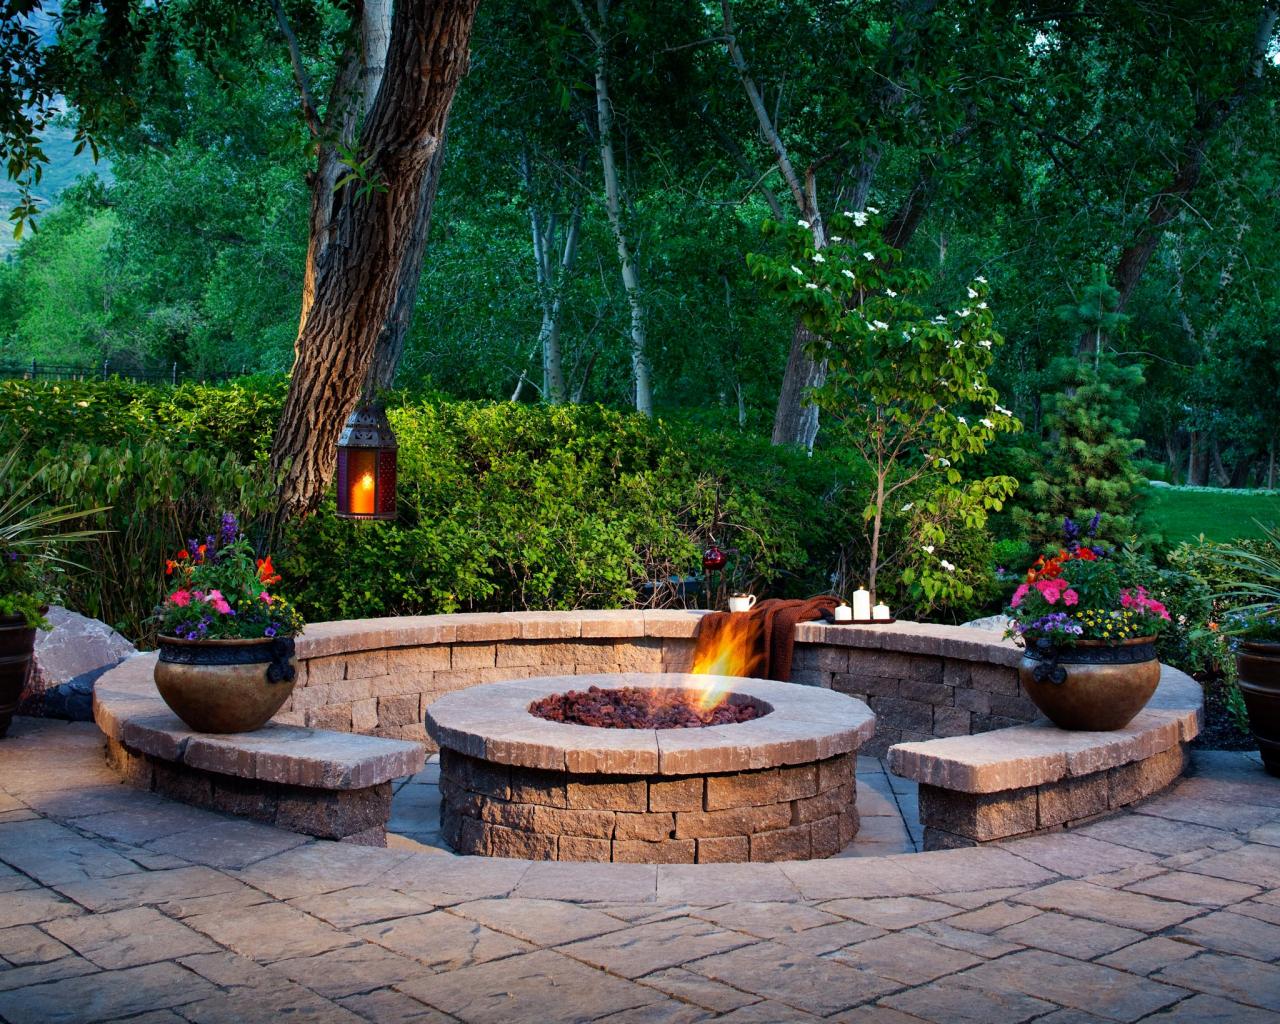 Designing A Patio Around Fire Pit Diy, How To Setup A Fire Pit